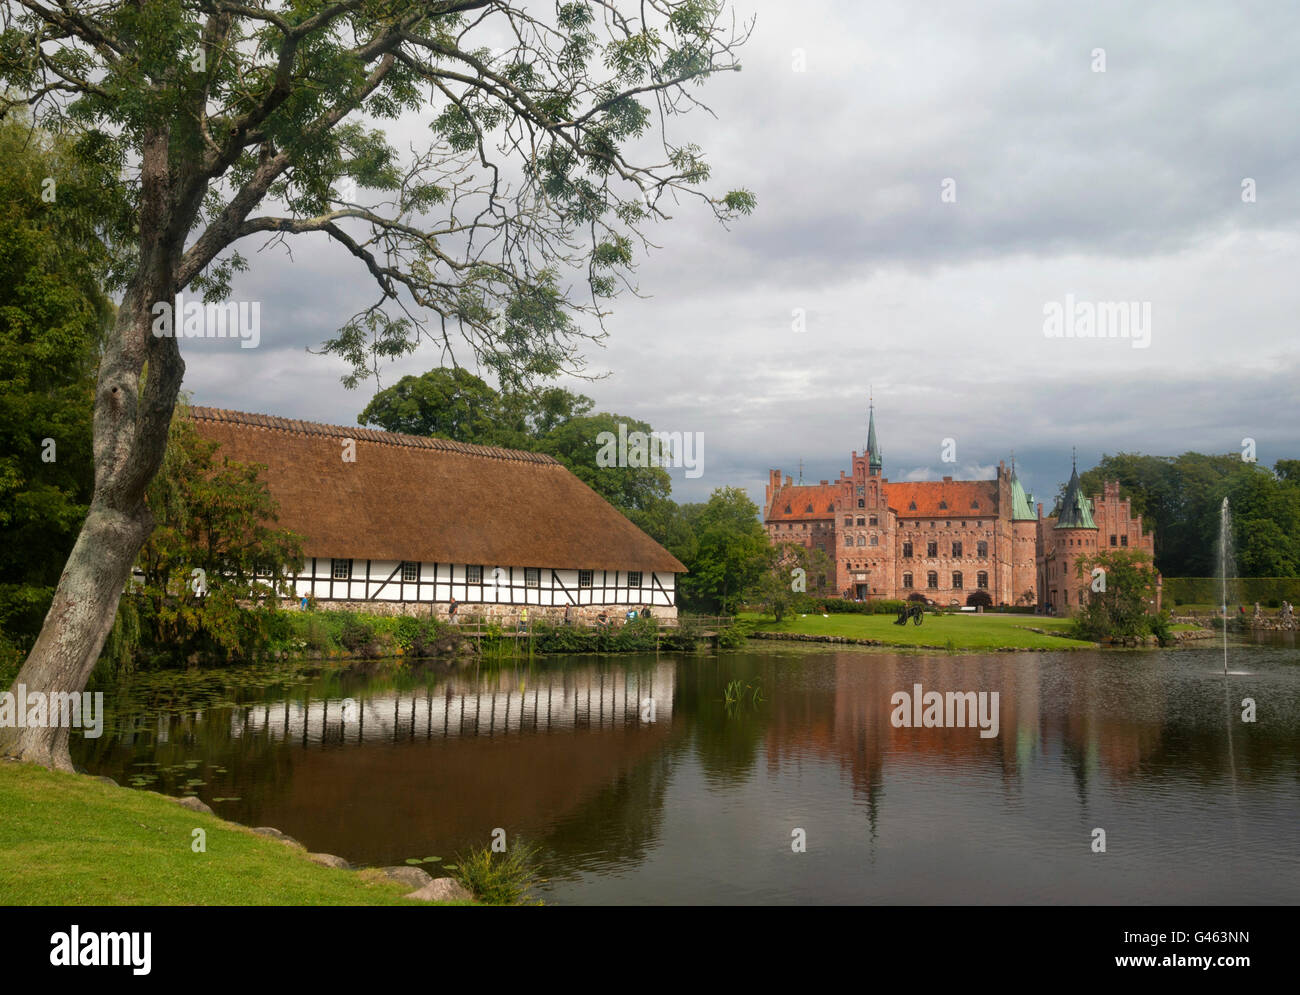 Egeskov castle located in the south of the island of Funen in Denmark Stock Photo